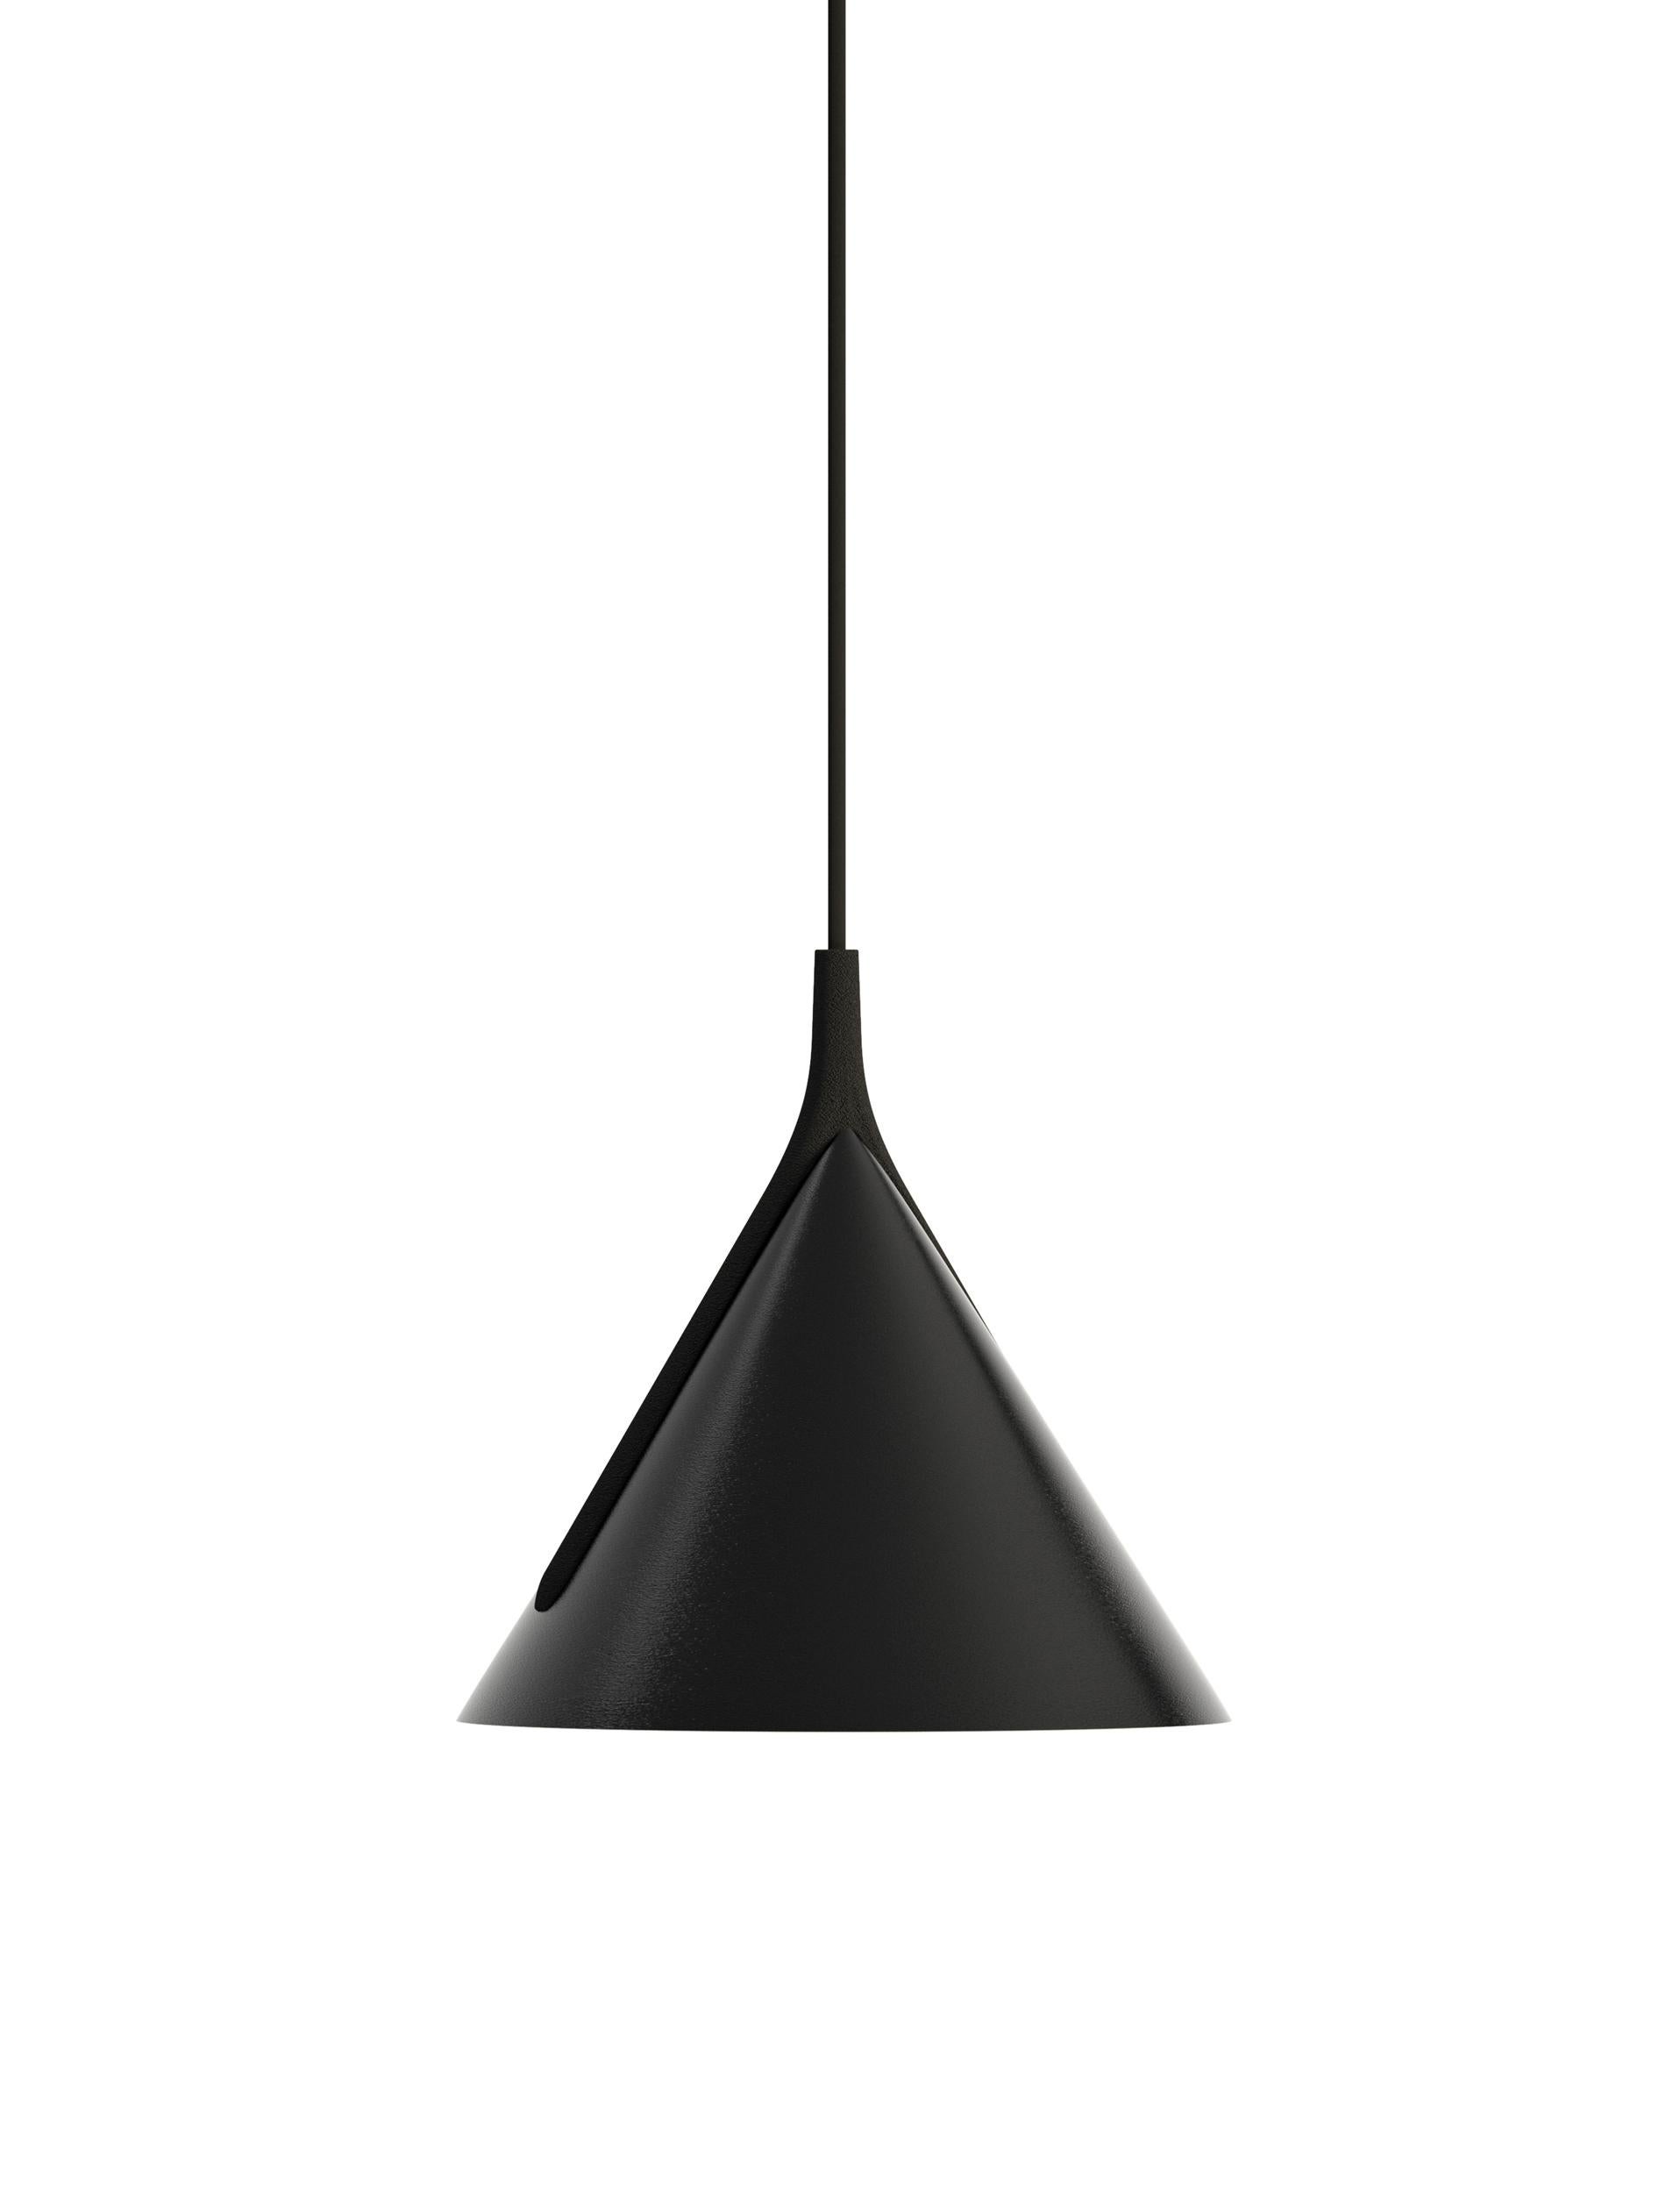 Axolight Jewel Mono Small Pendant Light in Black with Black Finish by Yonoh

Synthesizing is the gift of knowing how to transmit complex things in a simple way. Jewel mono summarizes: minimalism in design and high lighting performance, aesthetic